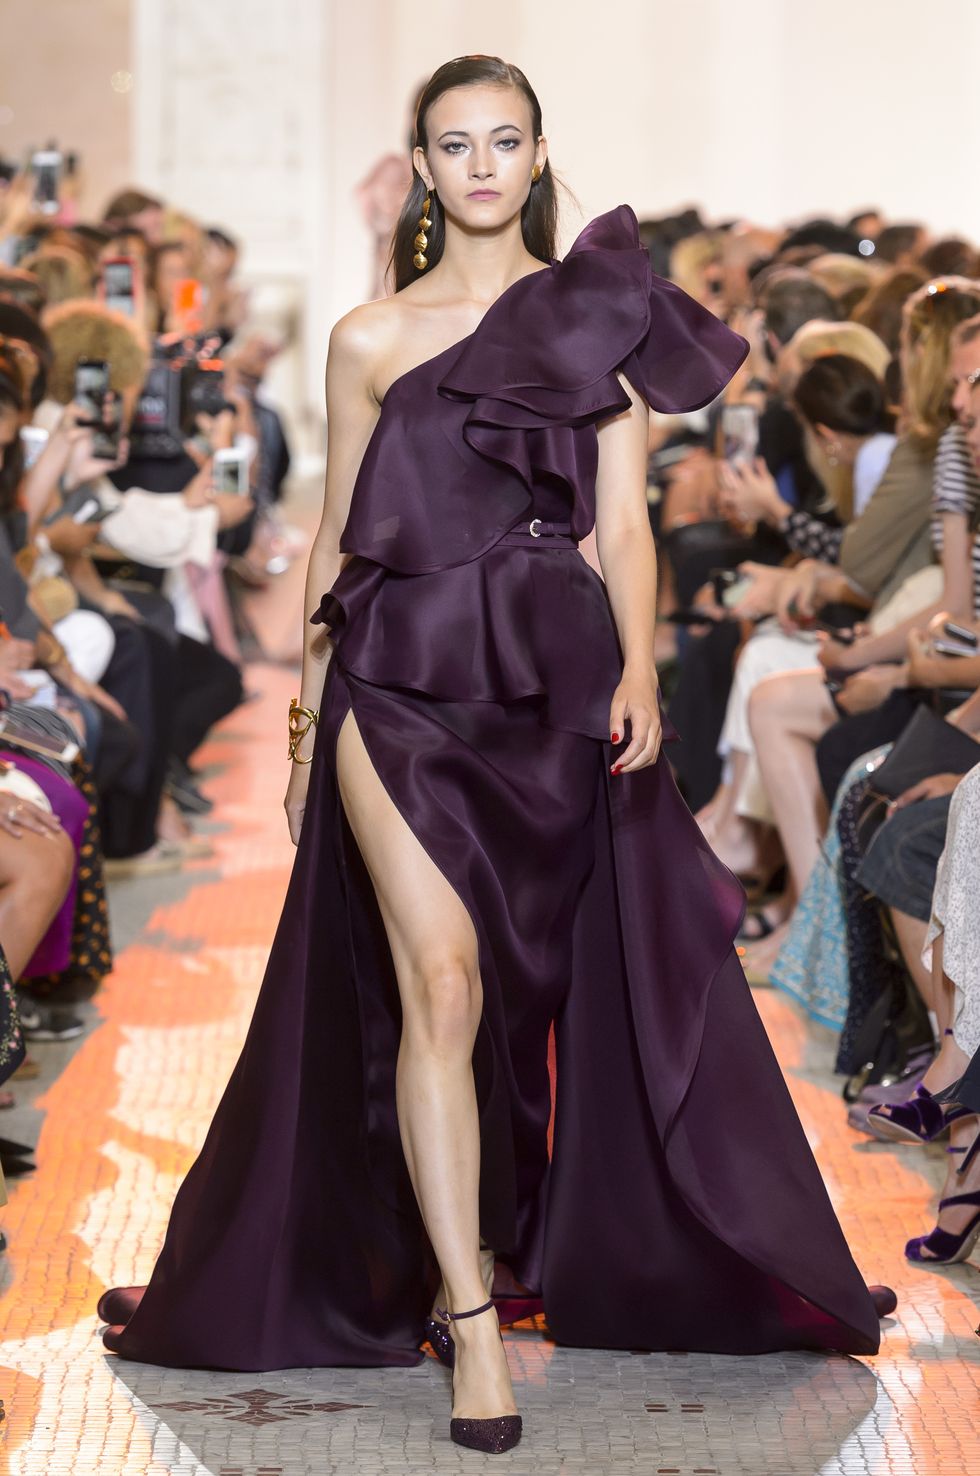 Elie Saab Haute Couture Fall Winter 2018/19